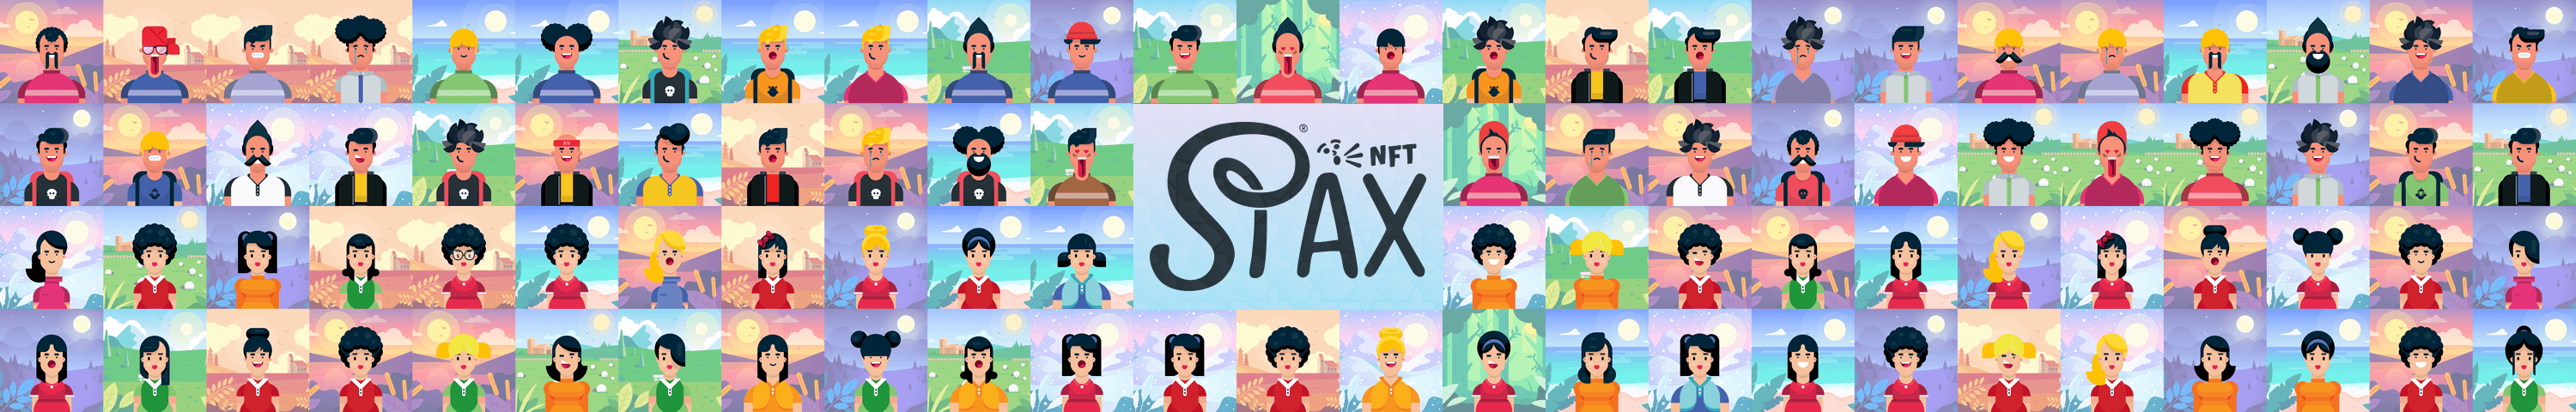 Spax (Official)